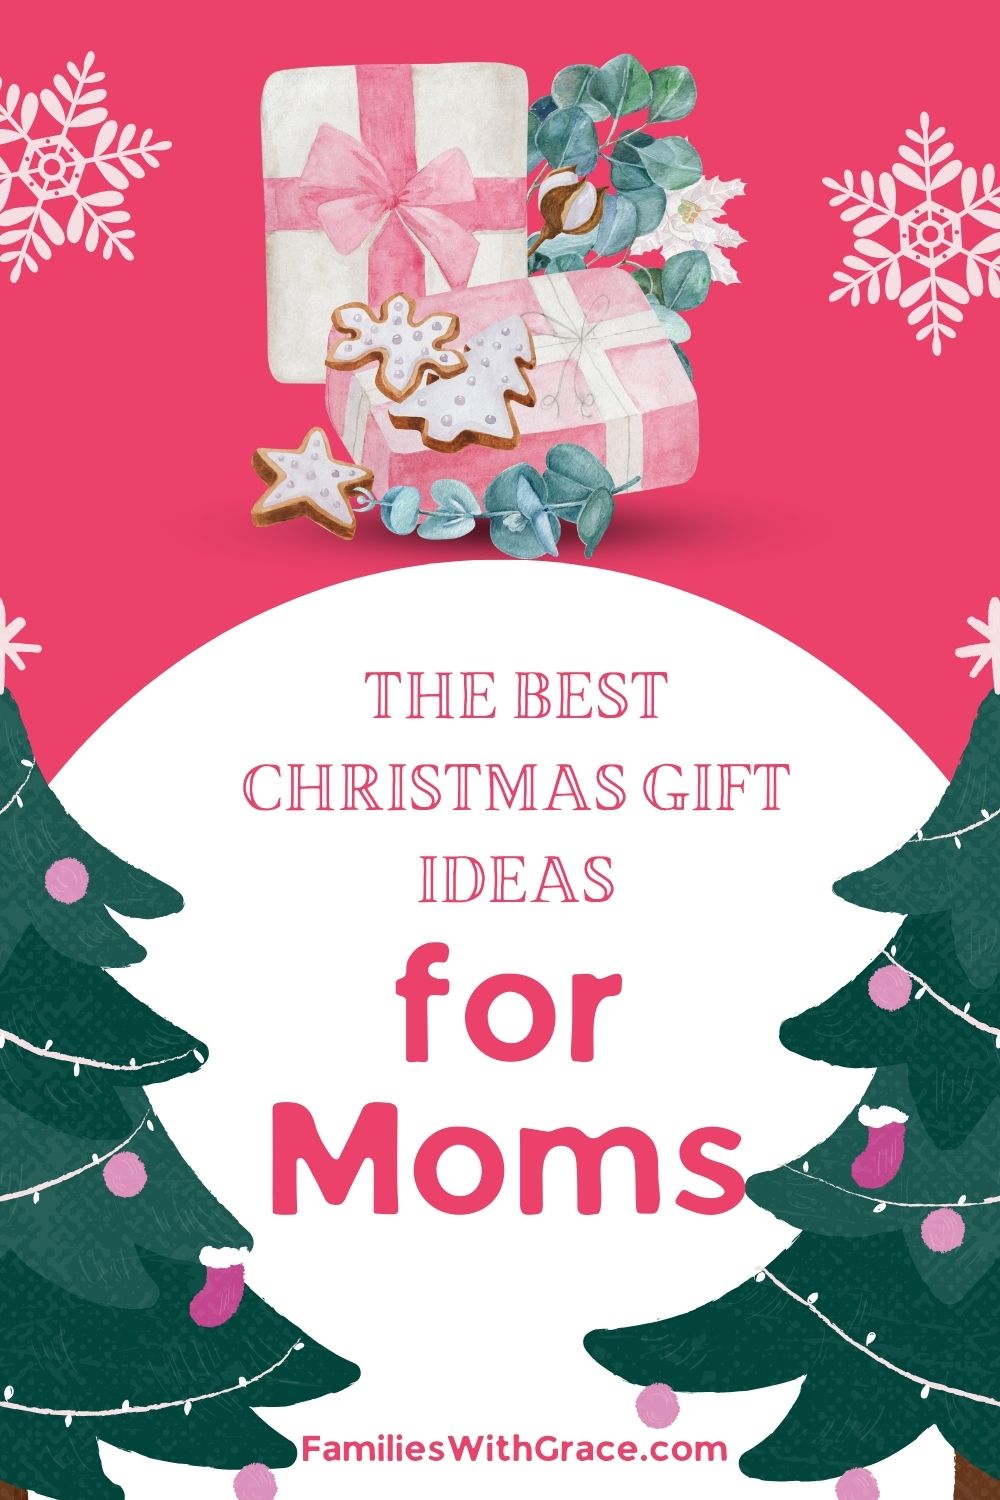 https://familieswithgrace.com/wp-content/uploads/2022/12/Christmas-gift-ideas-for-mom-friends-PIN8.jpg